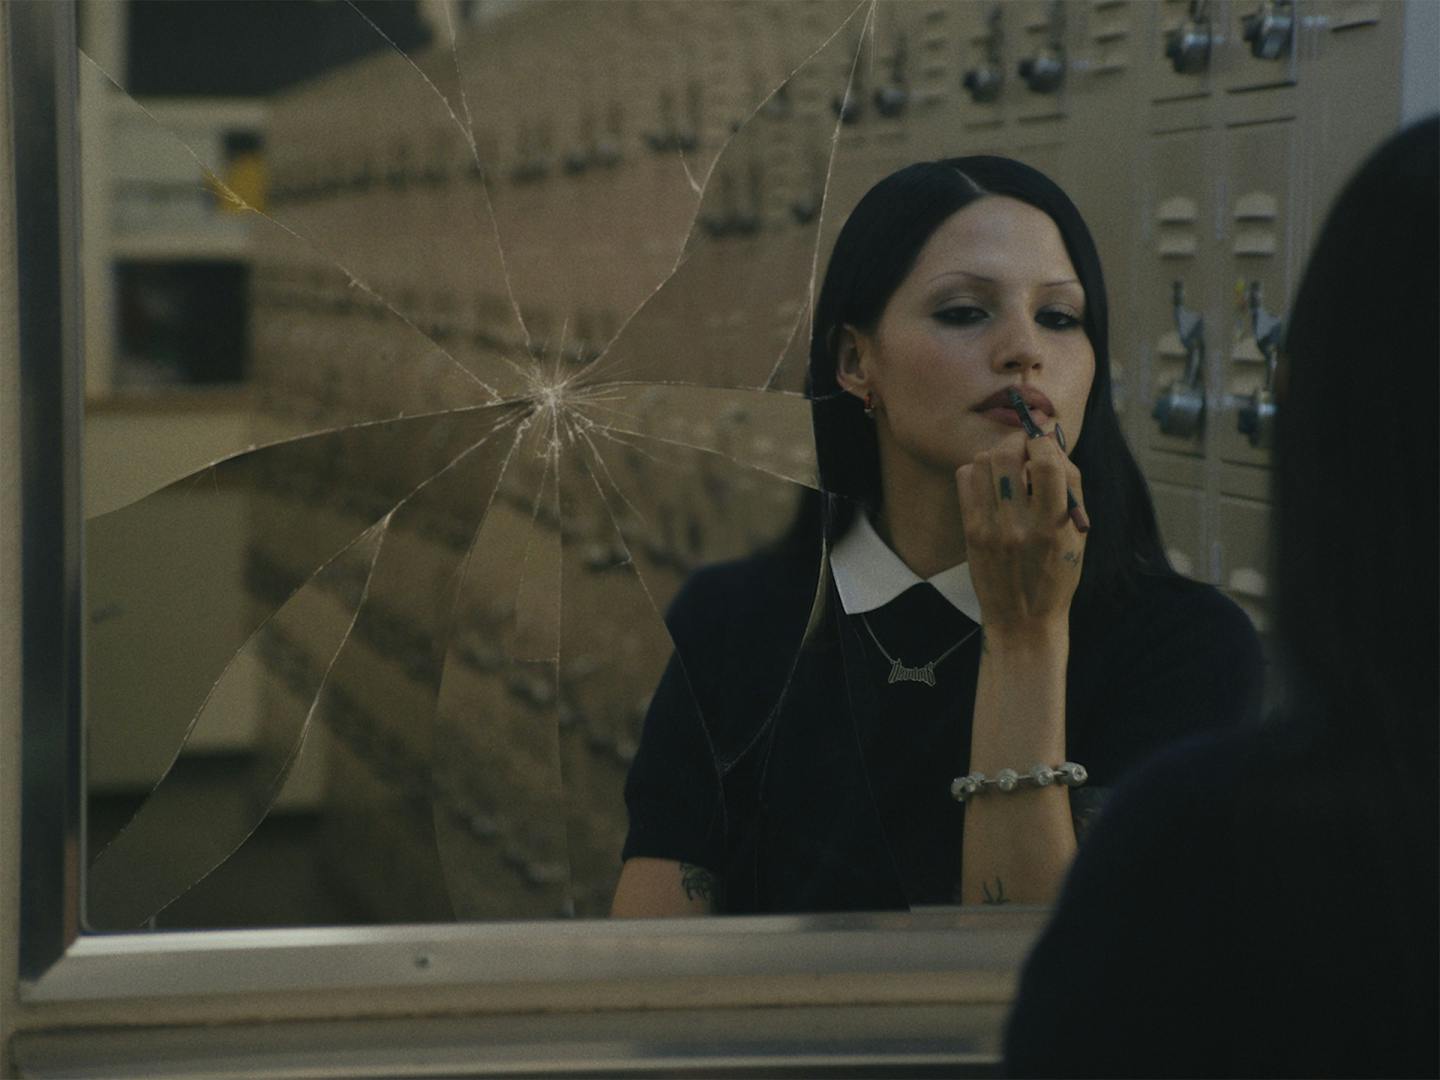 Still from Nike and Ambush commercial directed by Aidan Zamiri showing the campaign star with black hair, black dress and applying black lipstick in a cracked mirror